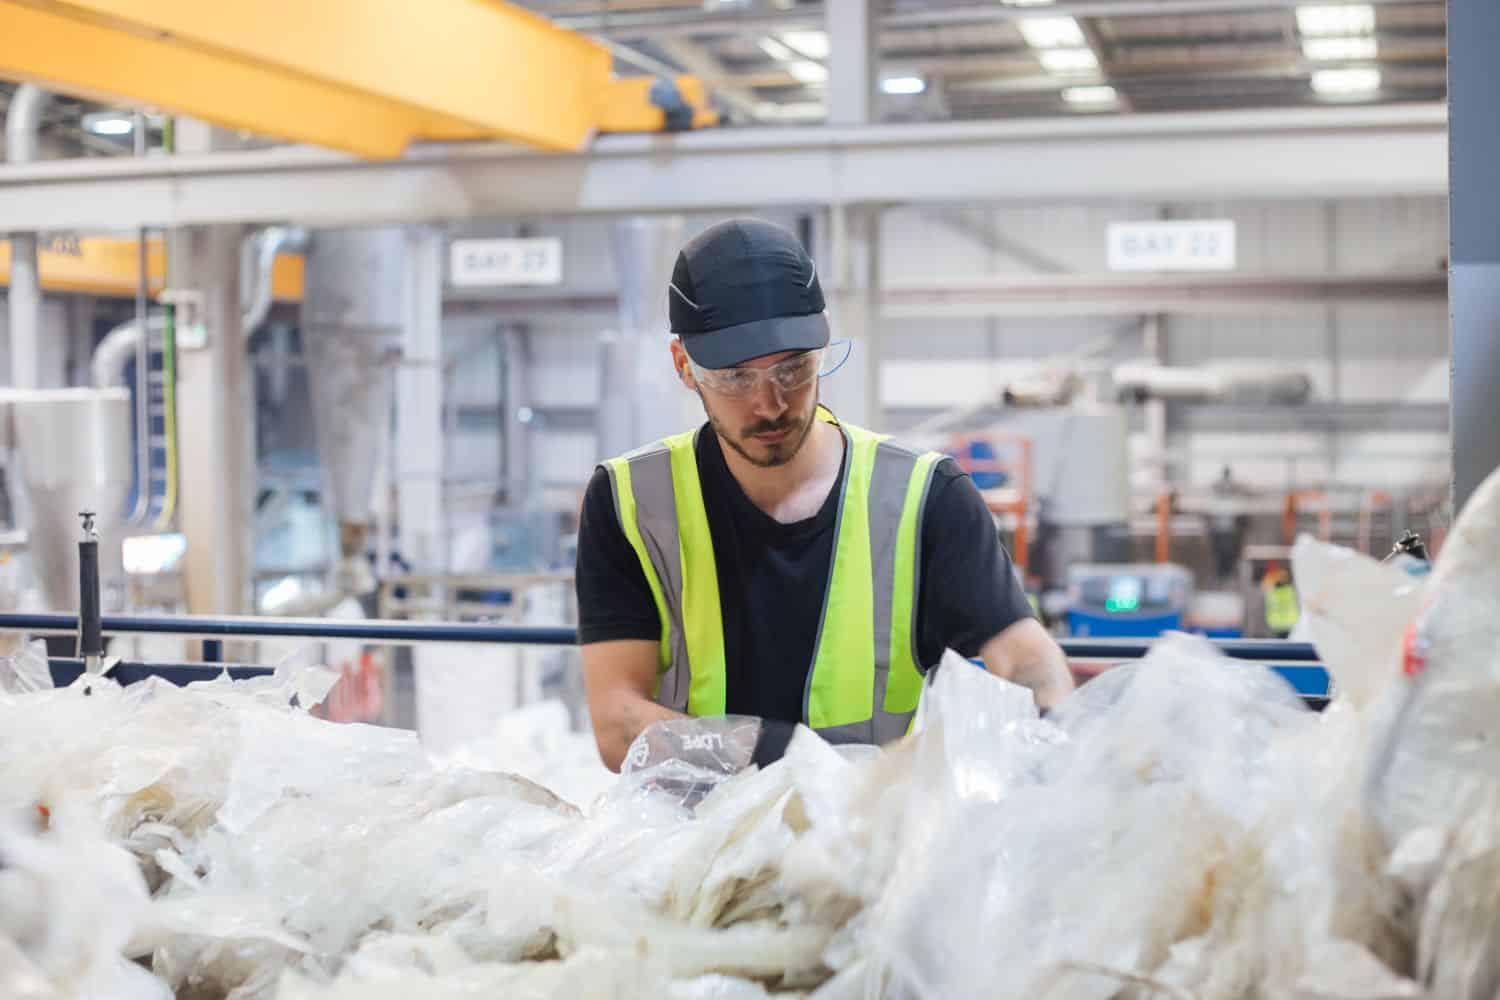 Duclo worker sorting through waste plastic bags